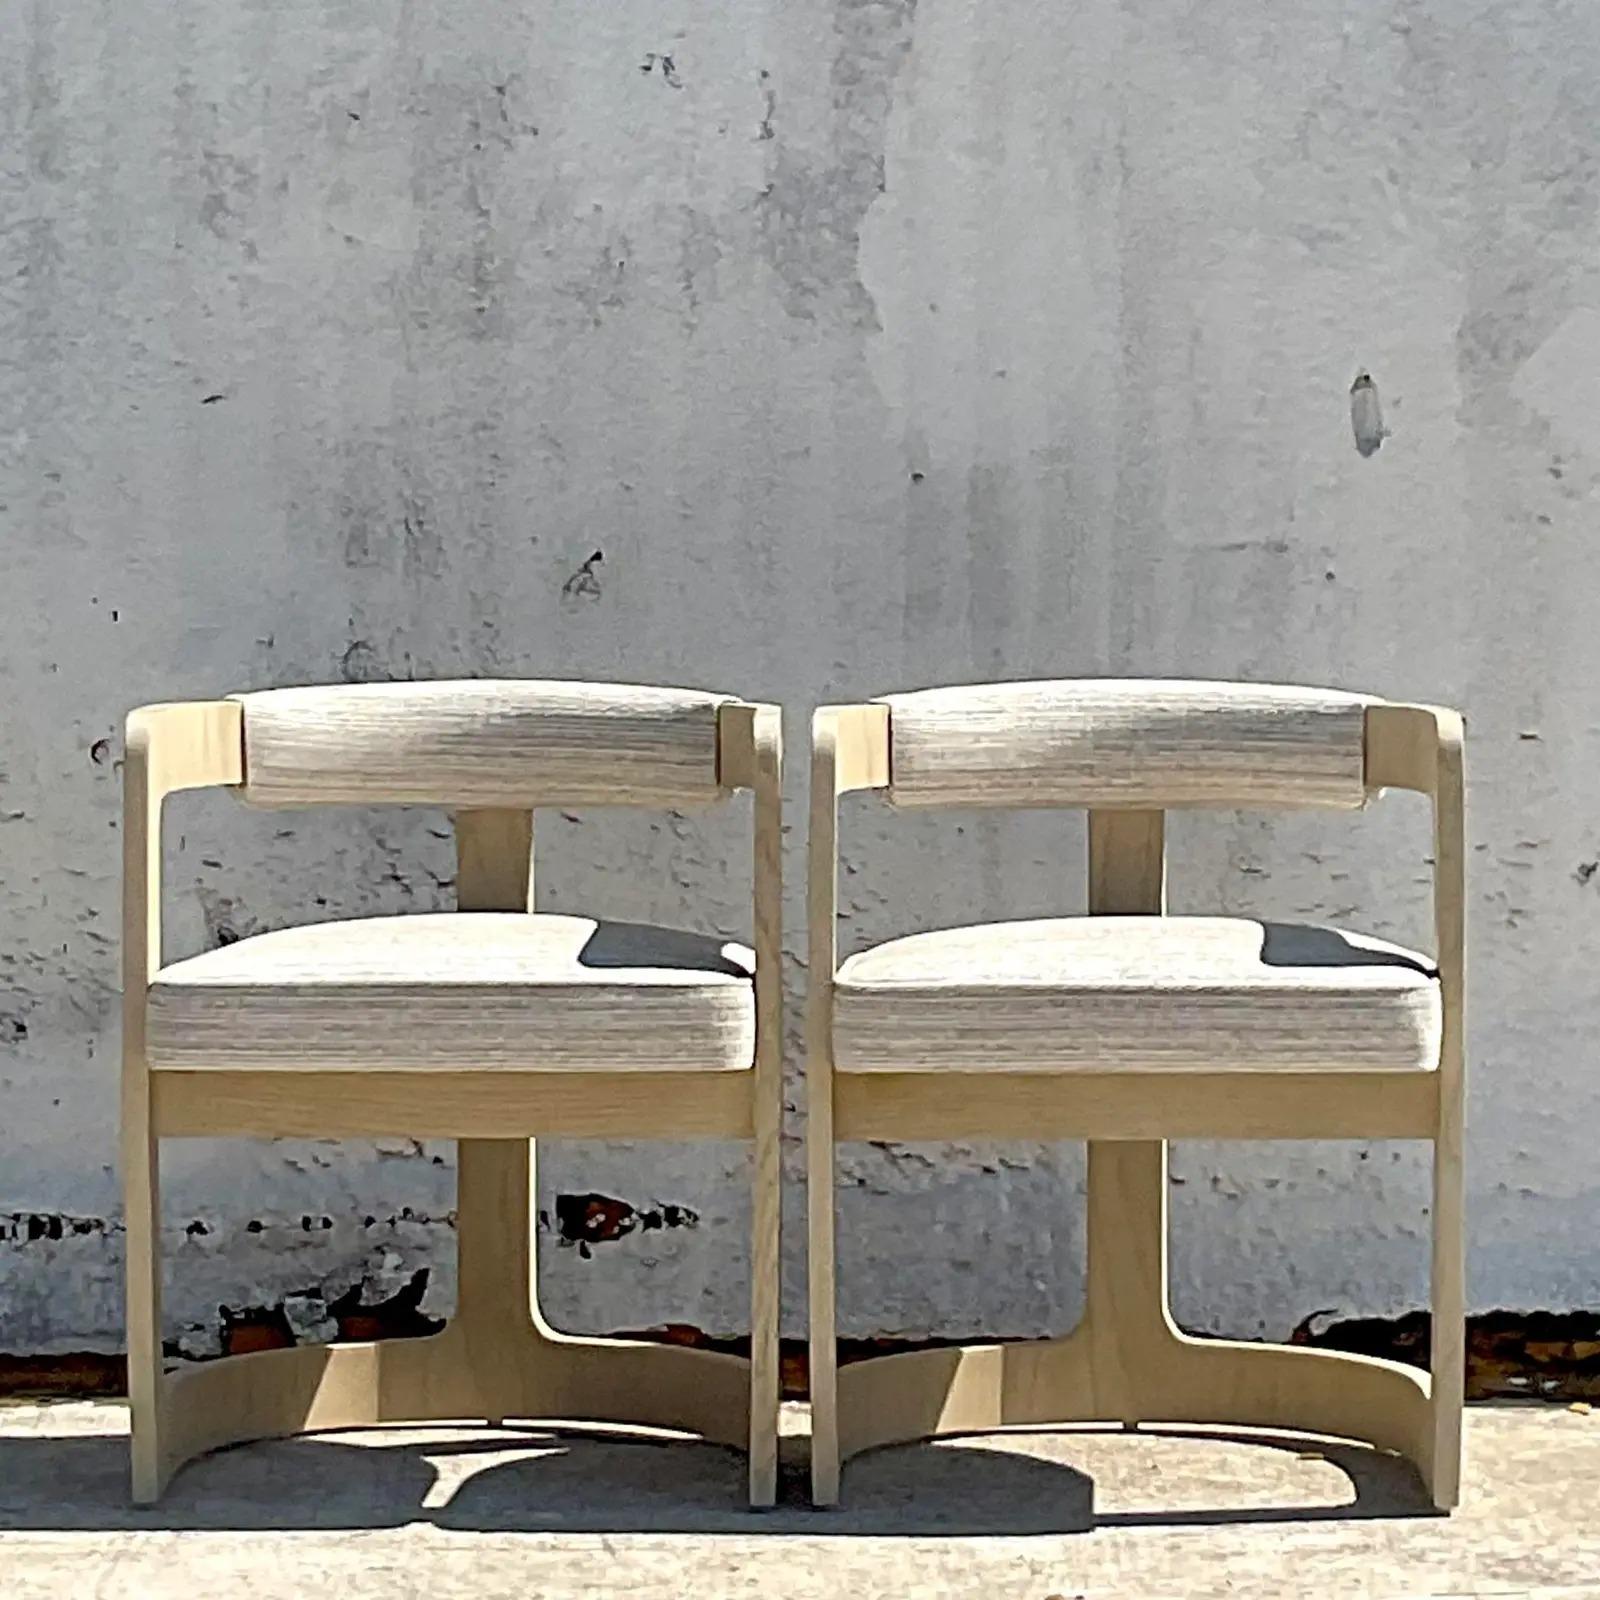 North American Vintage Contemporary Kelly Wearstler Cerused Oak Zuma Chairs, a Pair